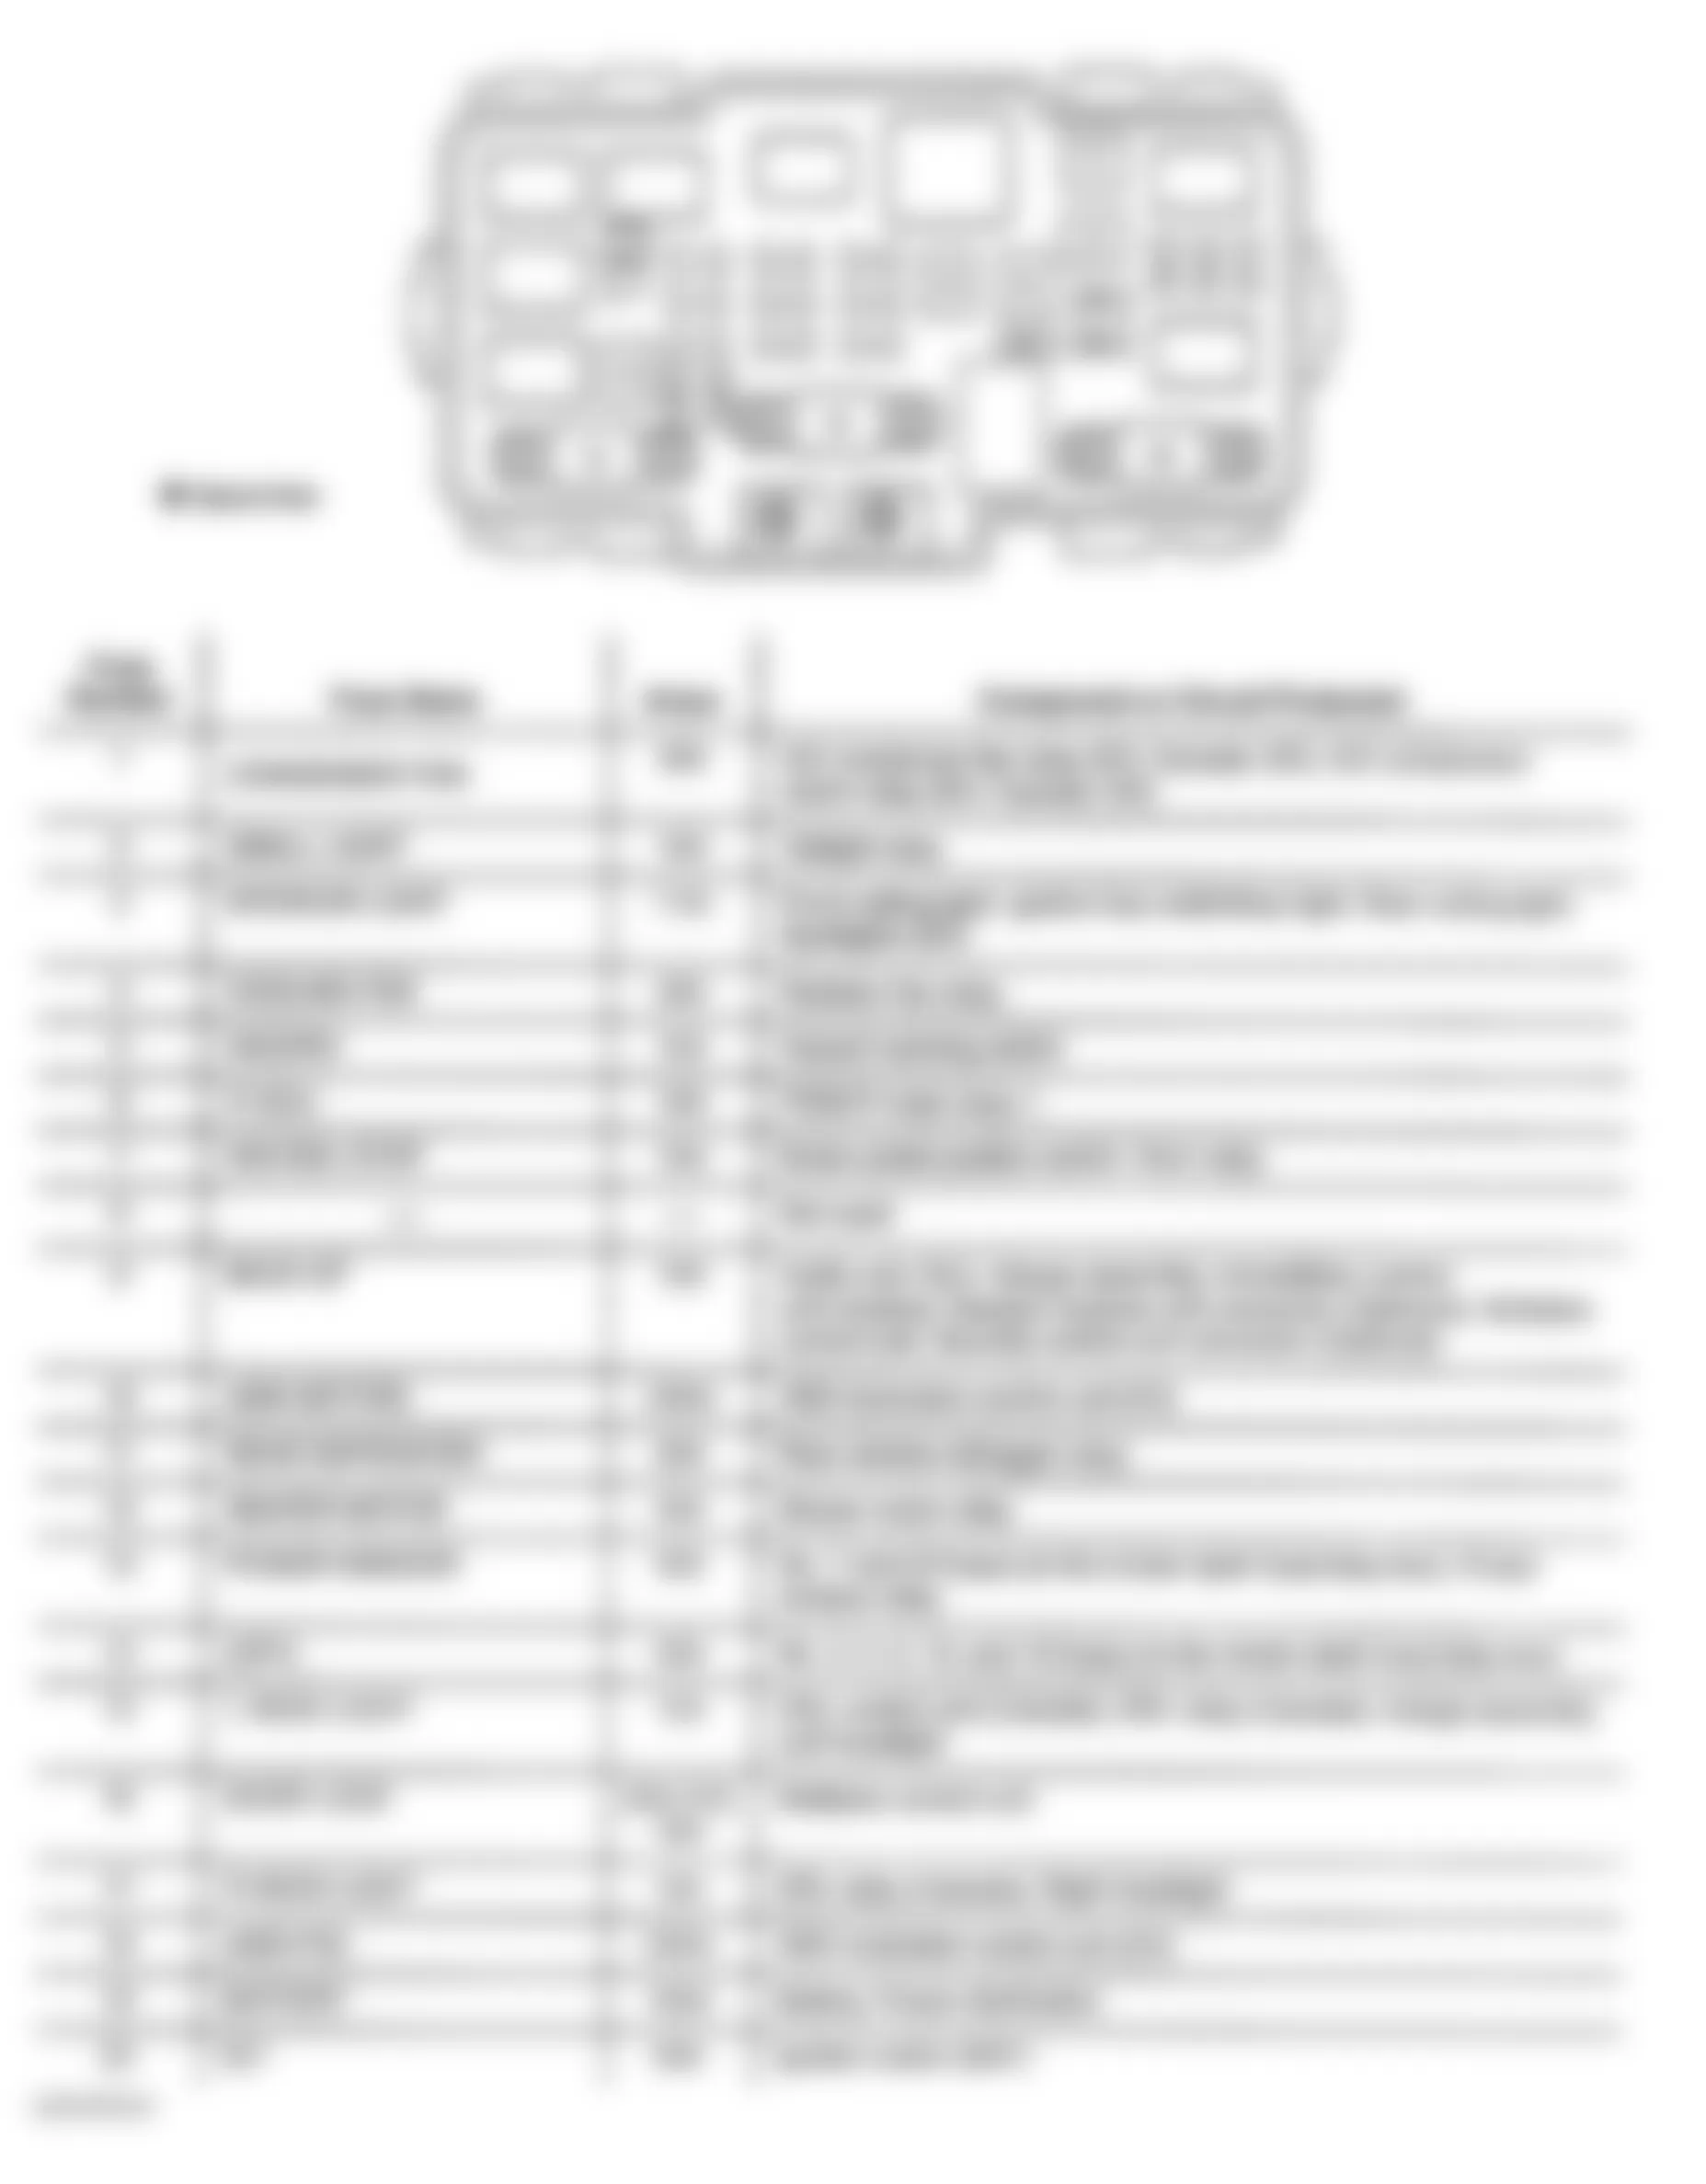 Honda Element EX 2004 - Component Locations -  Identifying Under-Hood Fuse/Relay Box Components